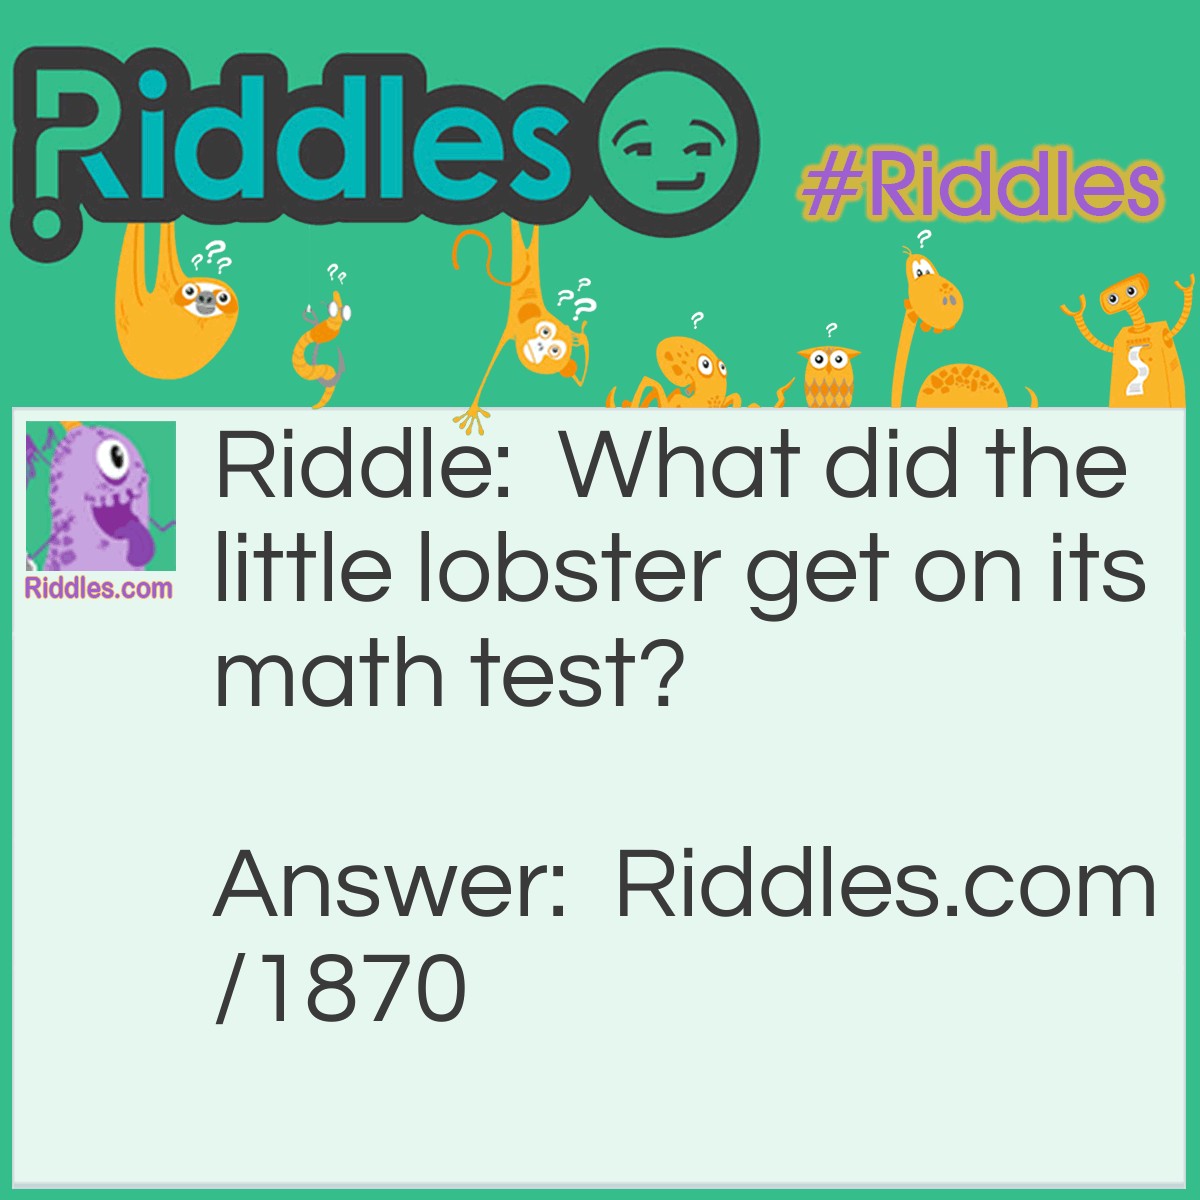 Riddle: What did the little lobster get on its math test? Answer: Sea-plus.